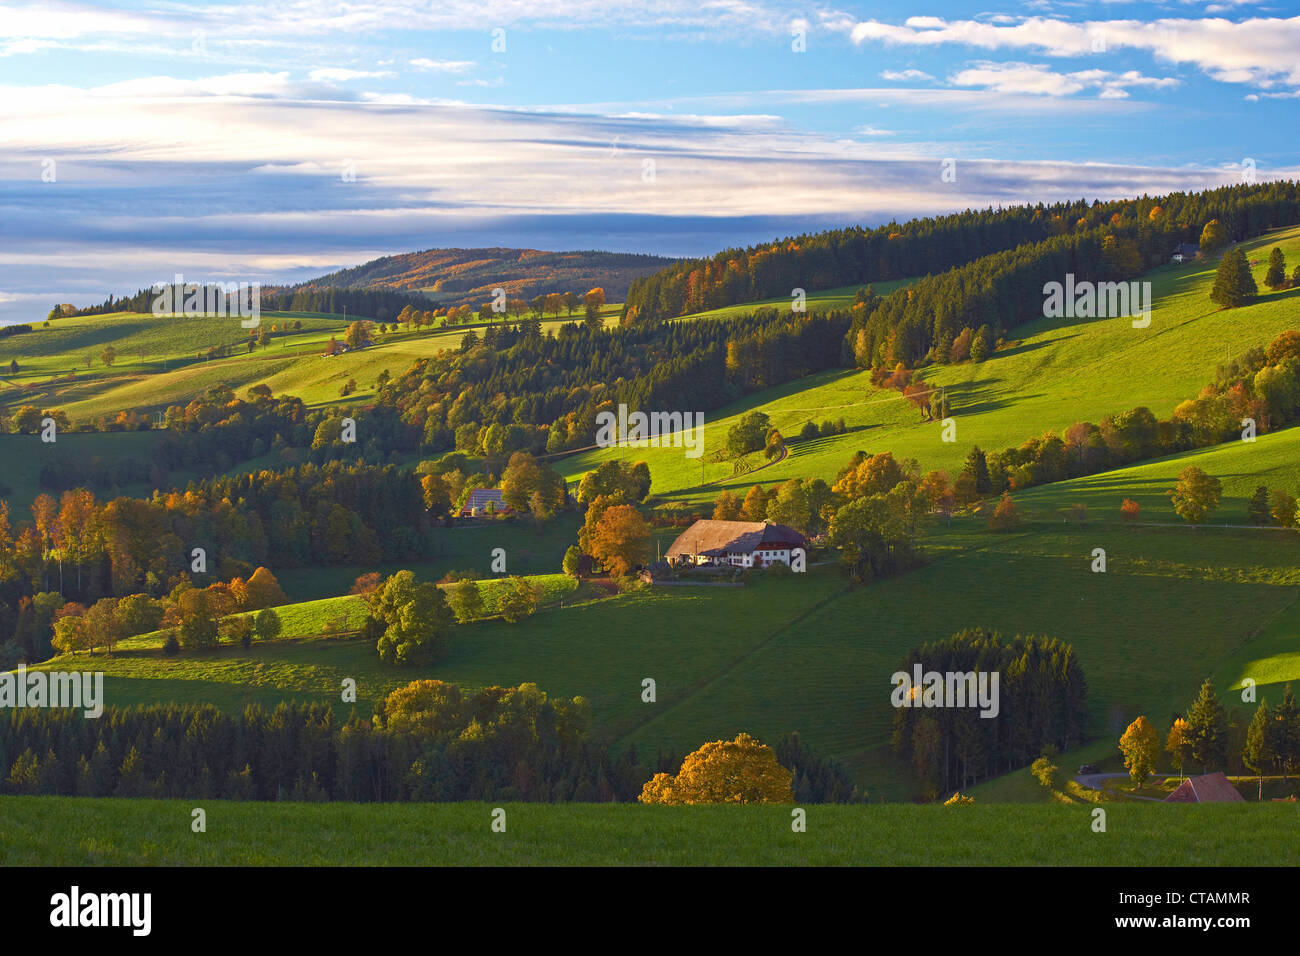 Autumn evening near St Maergen, Southern part of Black Forest, Black Forest, Baden-Wuerttemberg, Germany, Europe Stock Photo